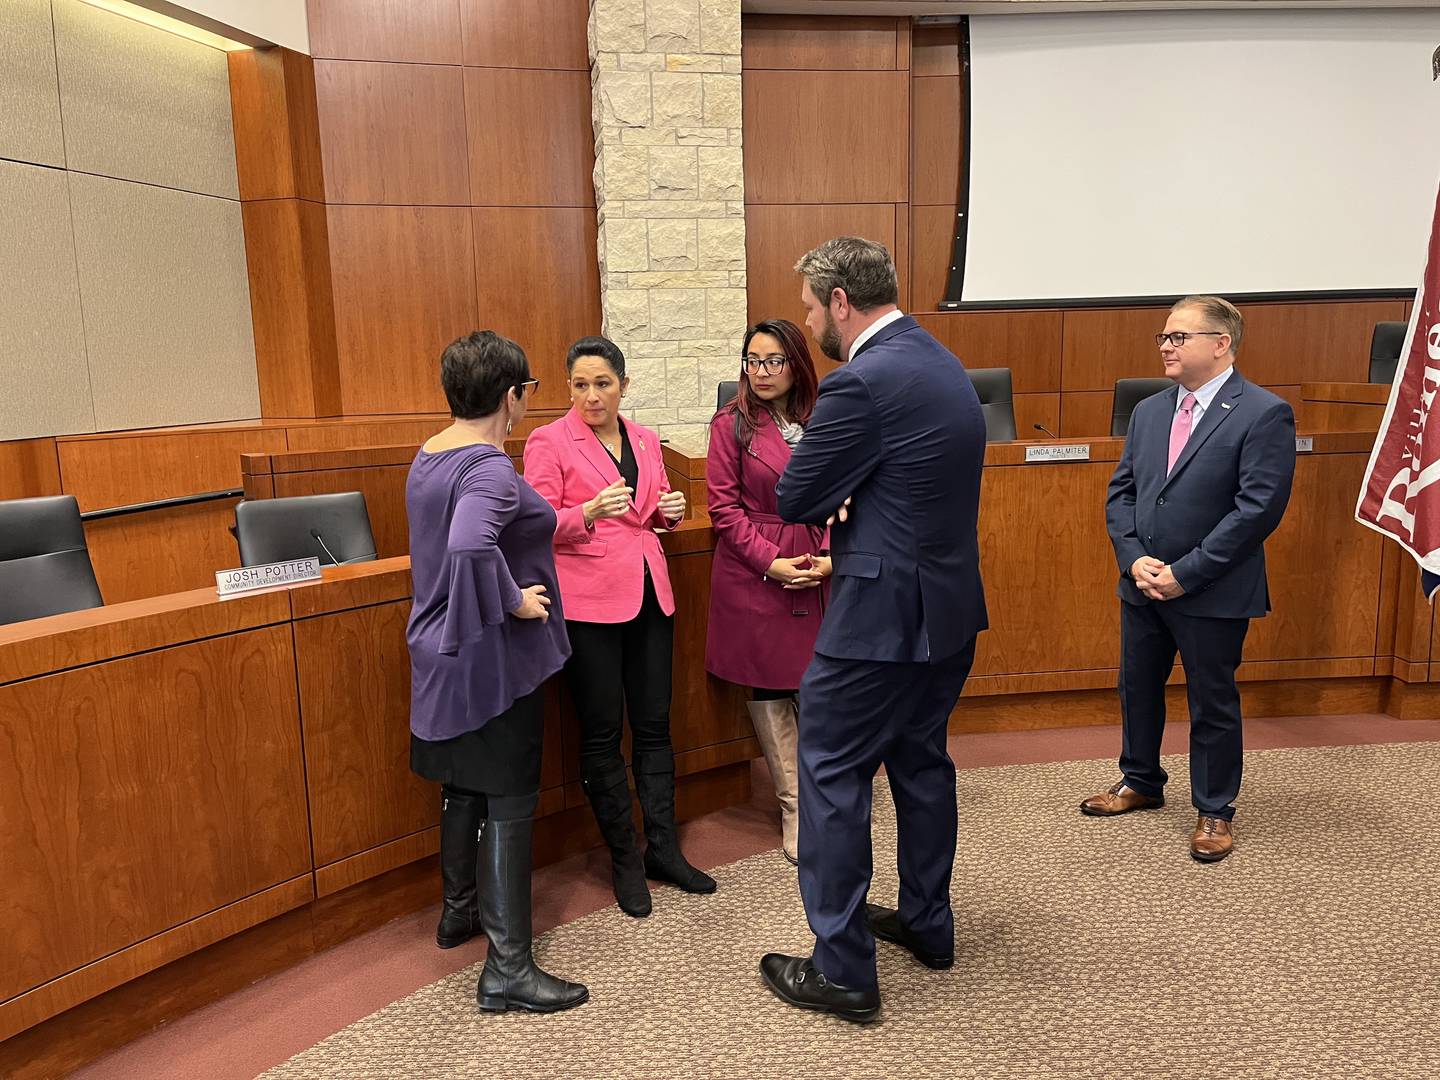 Illinois House Assistant Majority Leader Natalie Manley (left), Illinois State Comptroller Susana Mendoza, State Rep. Dagmara Avelar and State Rep. Harry Benton speak after a press conference held on Monday in Romeoville about legislation modifying the Illinois Line of Duty Compensation Act.